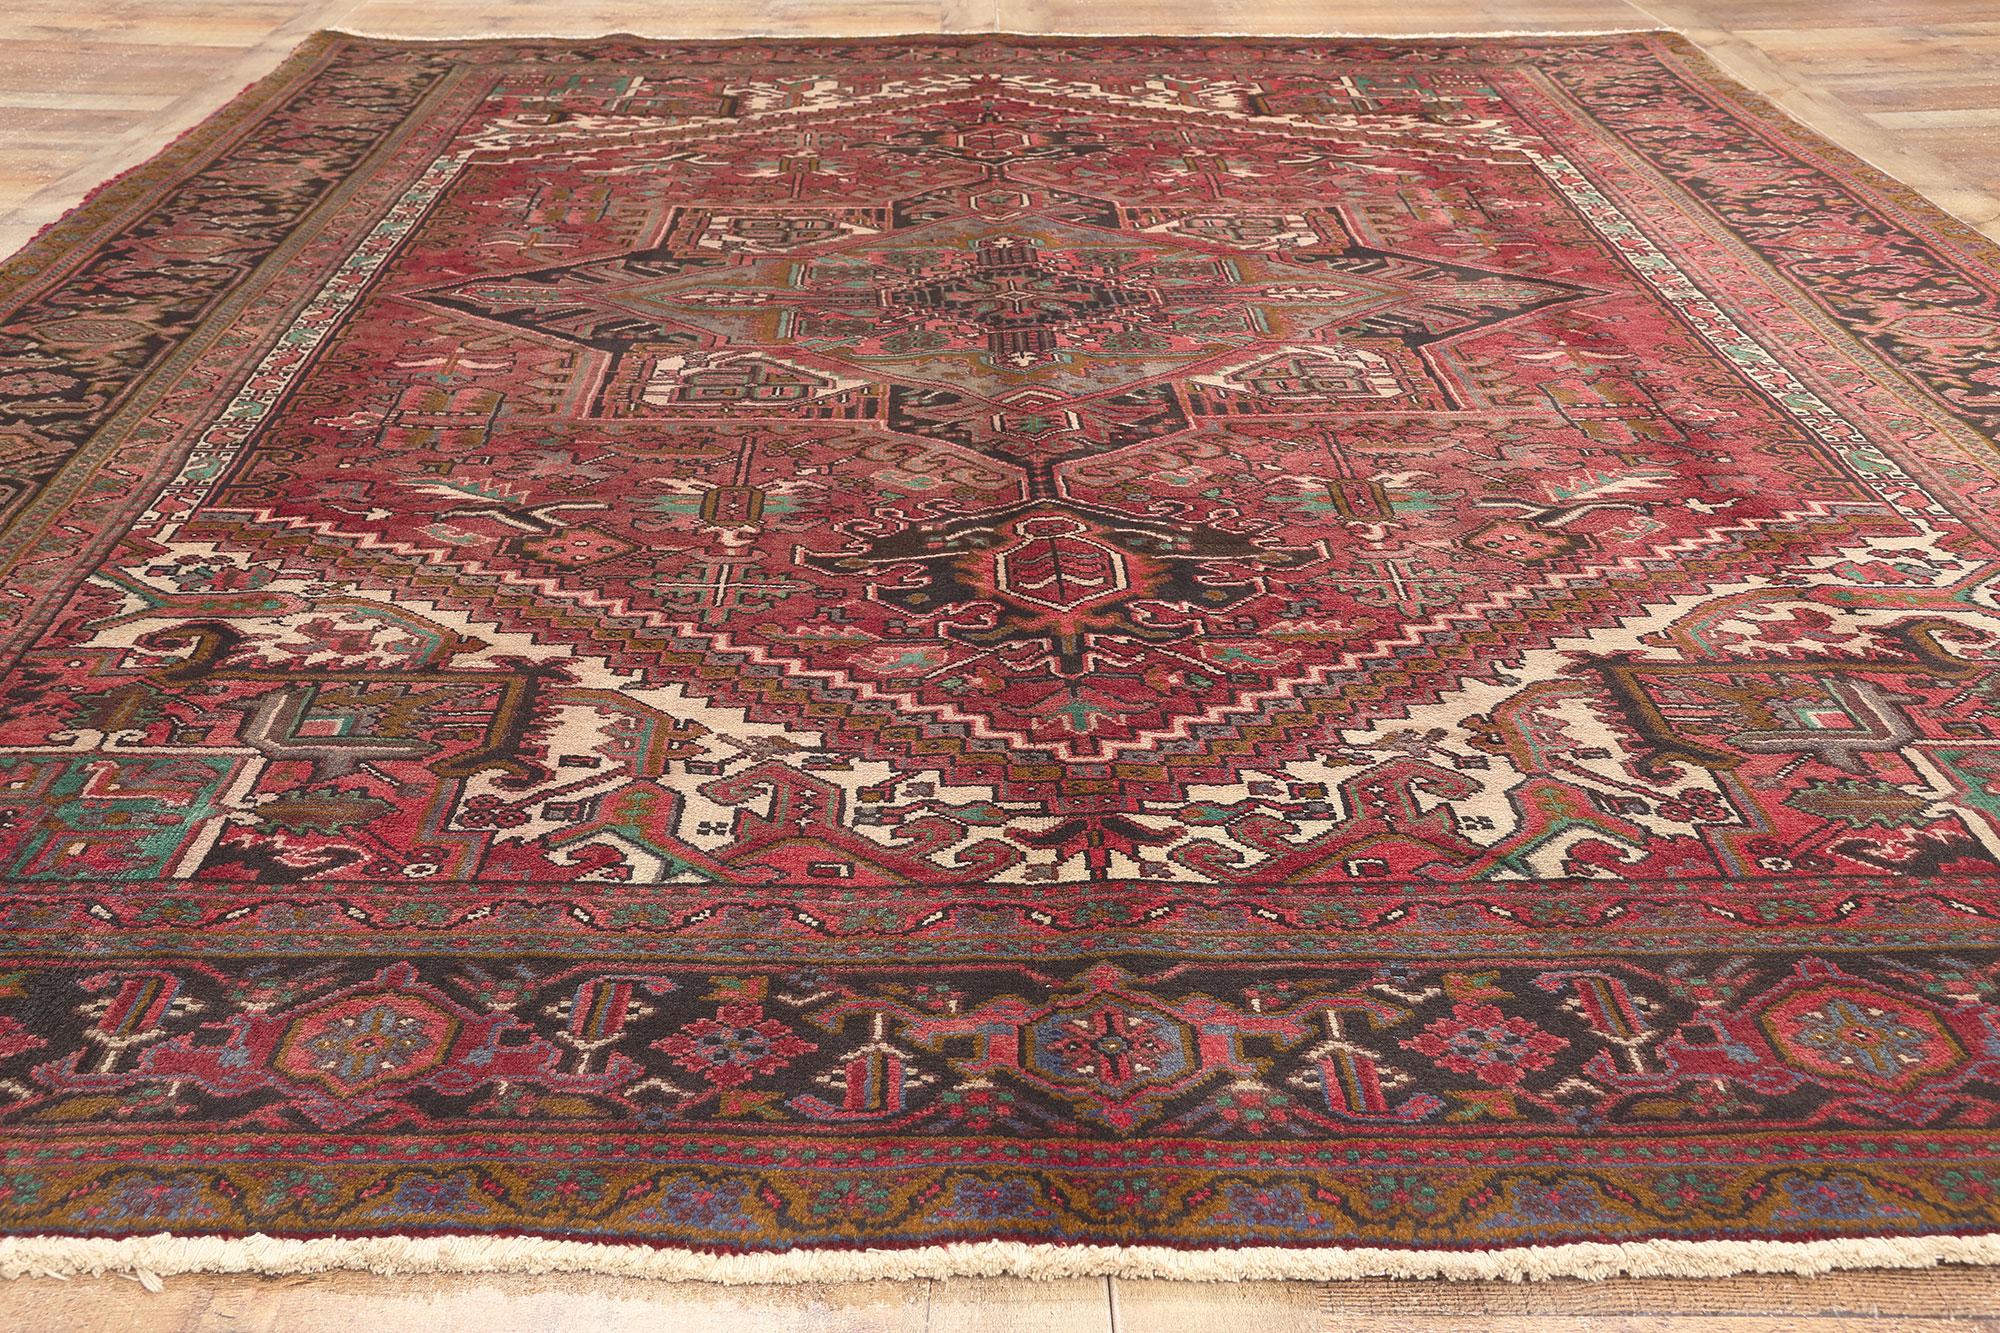 Vintage Persian Heriz Rug, Timeless Appeal Meets Perpetually Posh In Good Condition For Sale In Dallas, TX